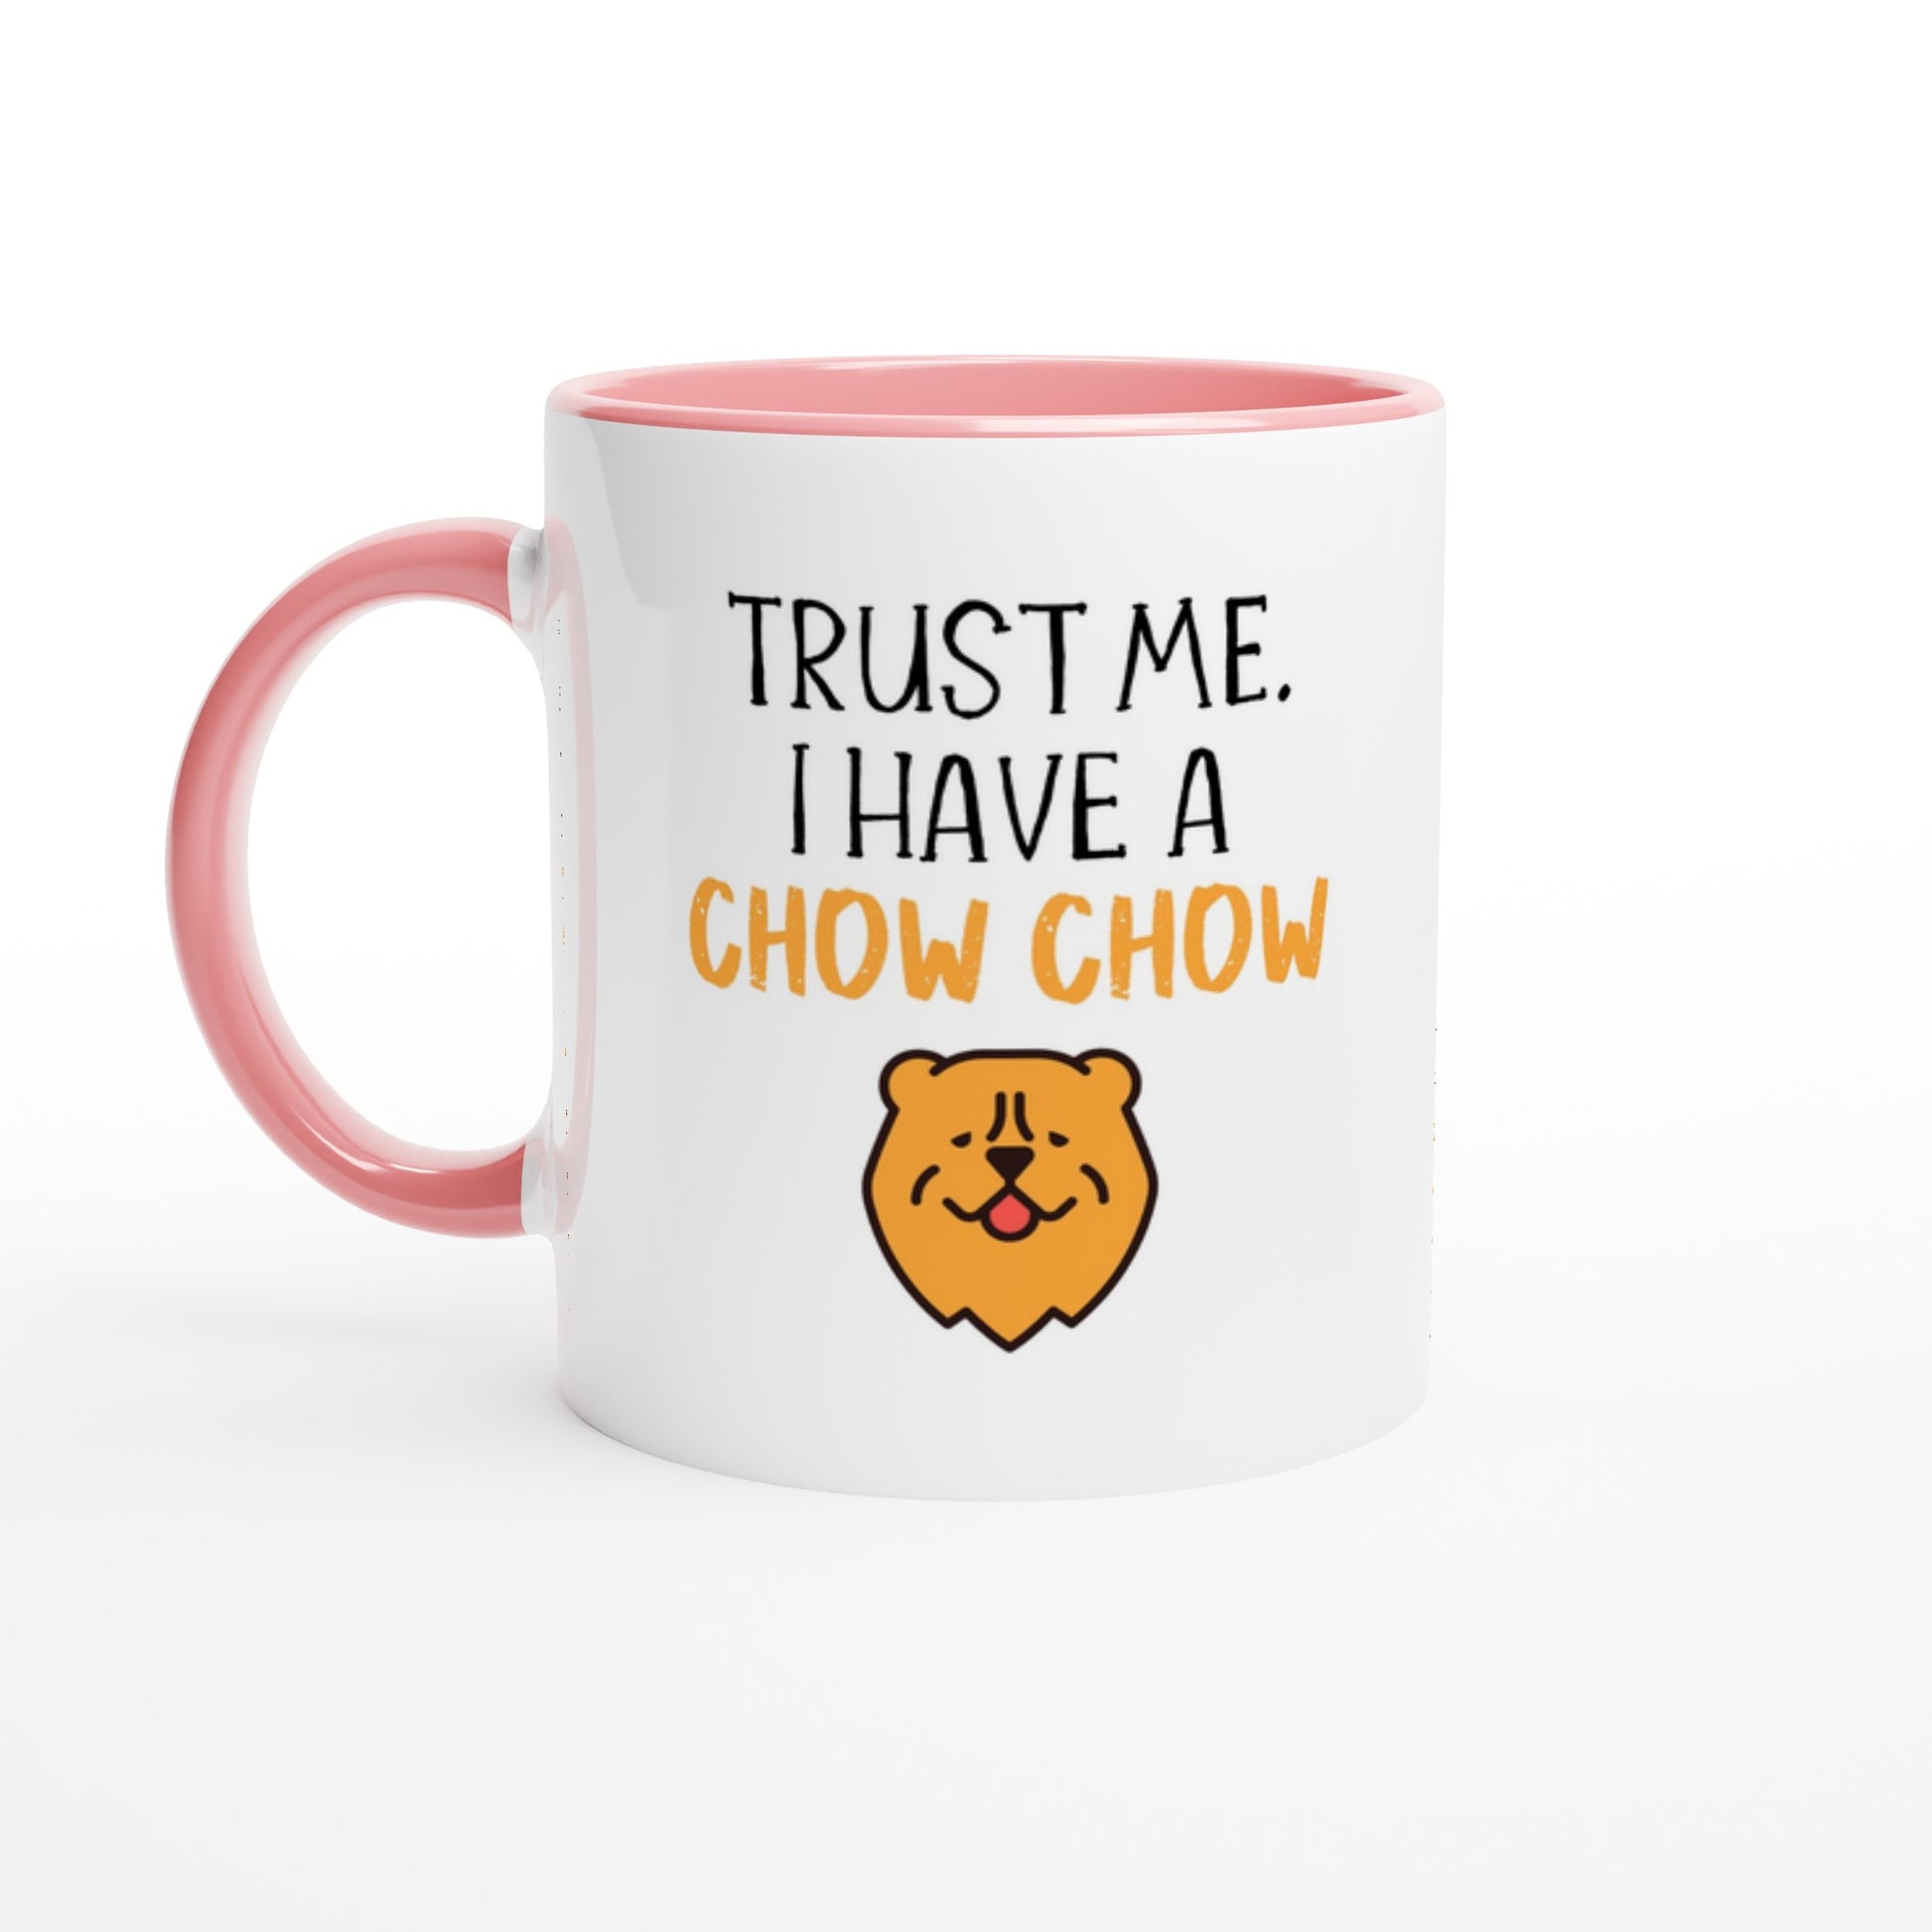 A coffee mug with the slogan: "Trust Me. I have a Chow Chow". Handle and inside Color is pink